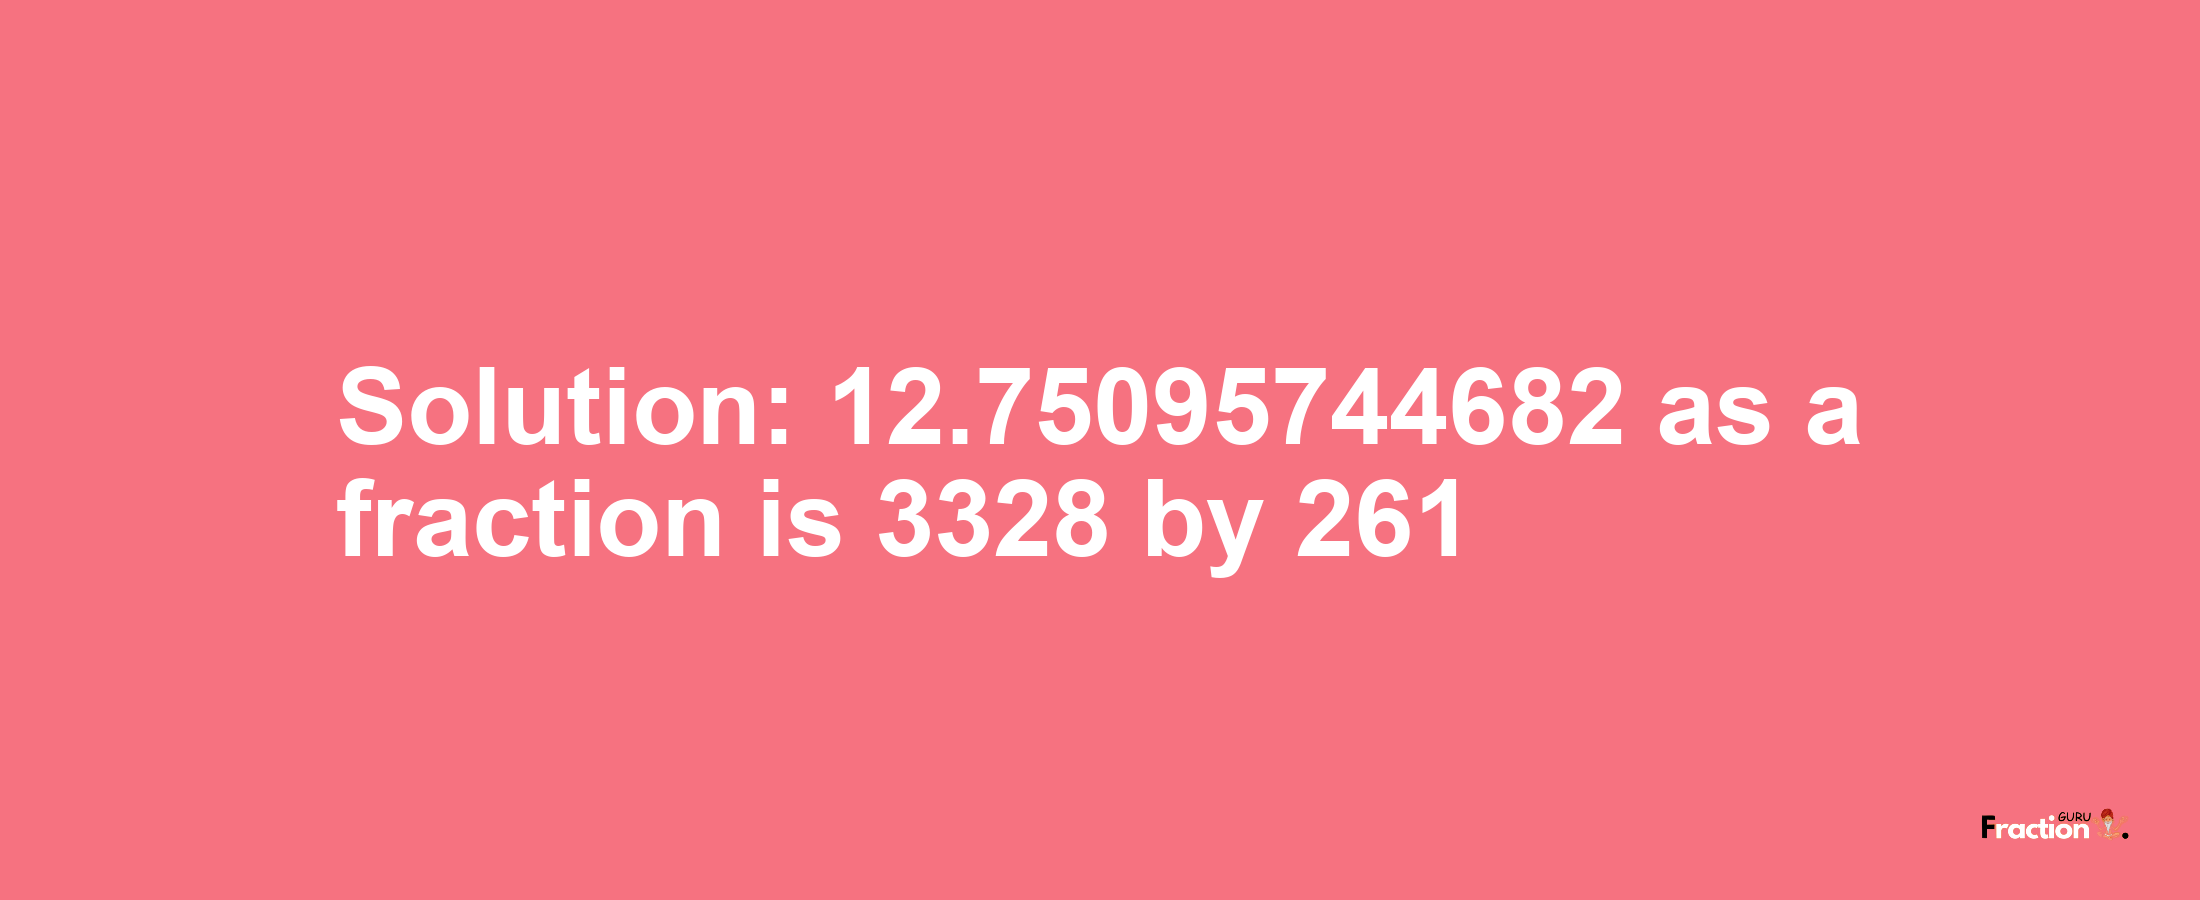 Solution:12.75095744682 as a fraction is 3328/261